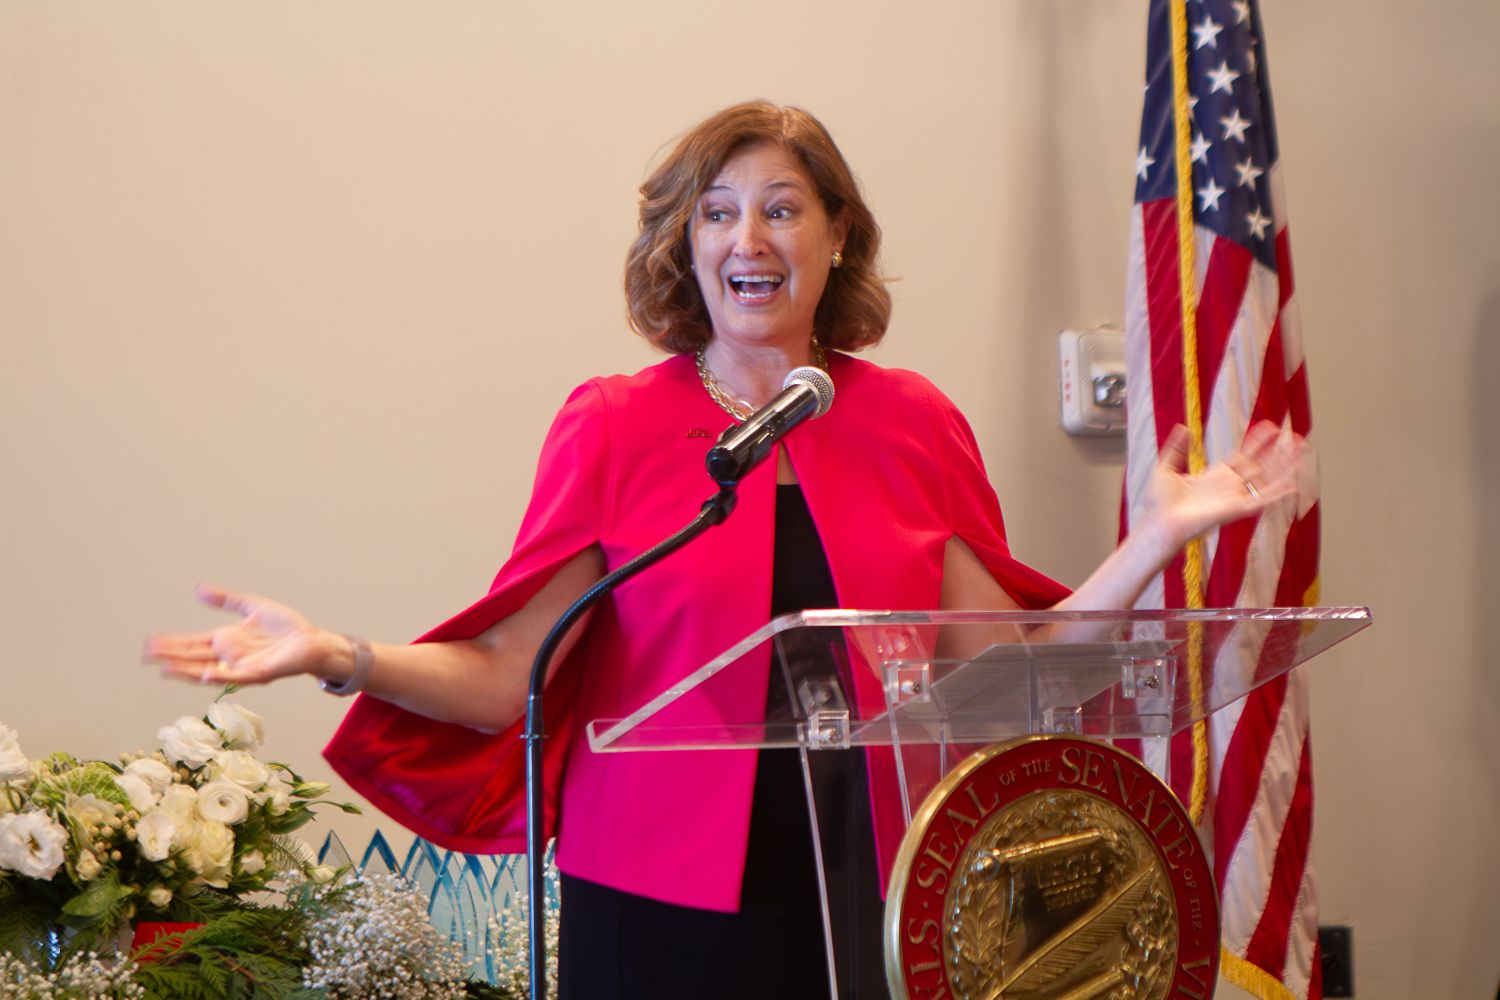 PHOTO: David Lohr | The South Pasadenan | Dr. Laurie Leshin, director at Jet Propulsion Laboratory since May 2022, served as the keynote speaker.